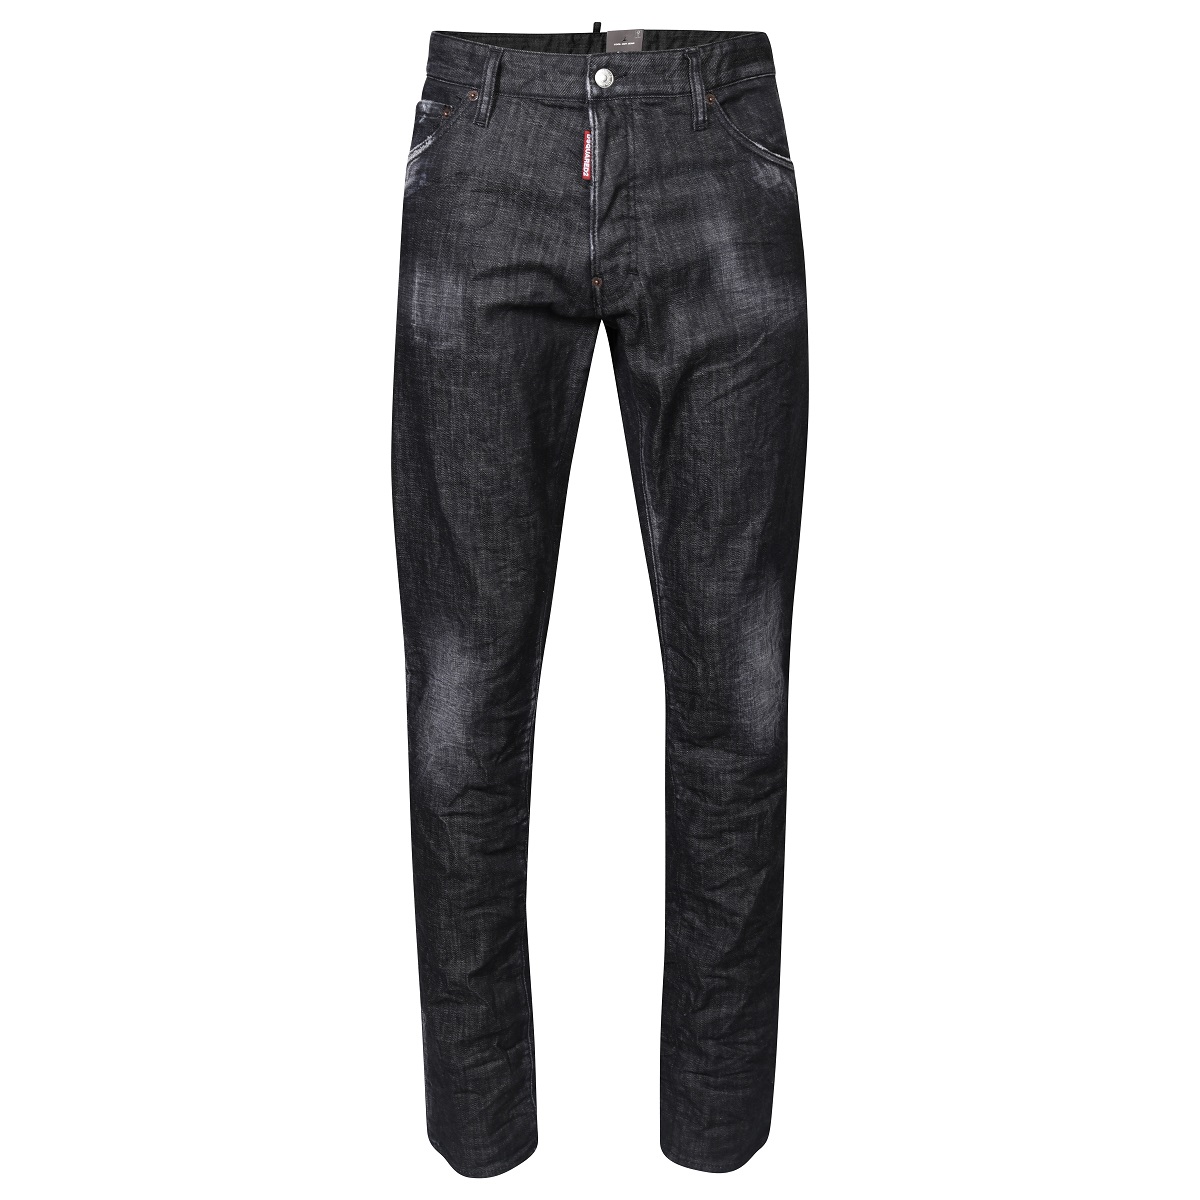 DSQUARED2 Jeans Cool Guy in Black 46